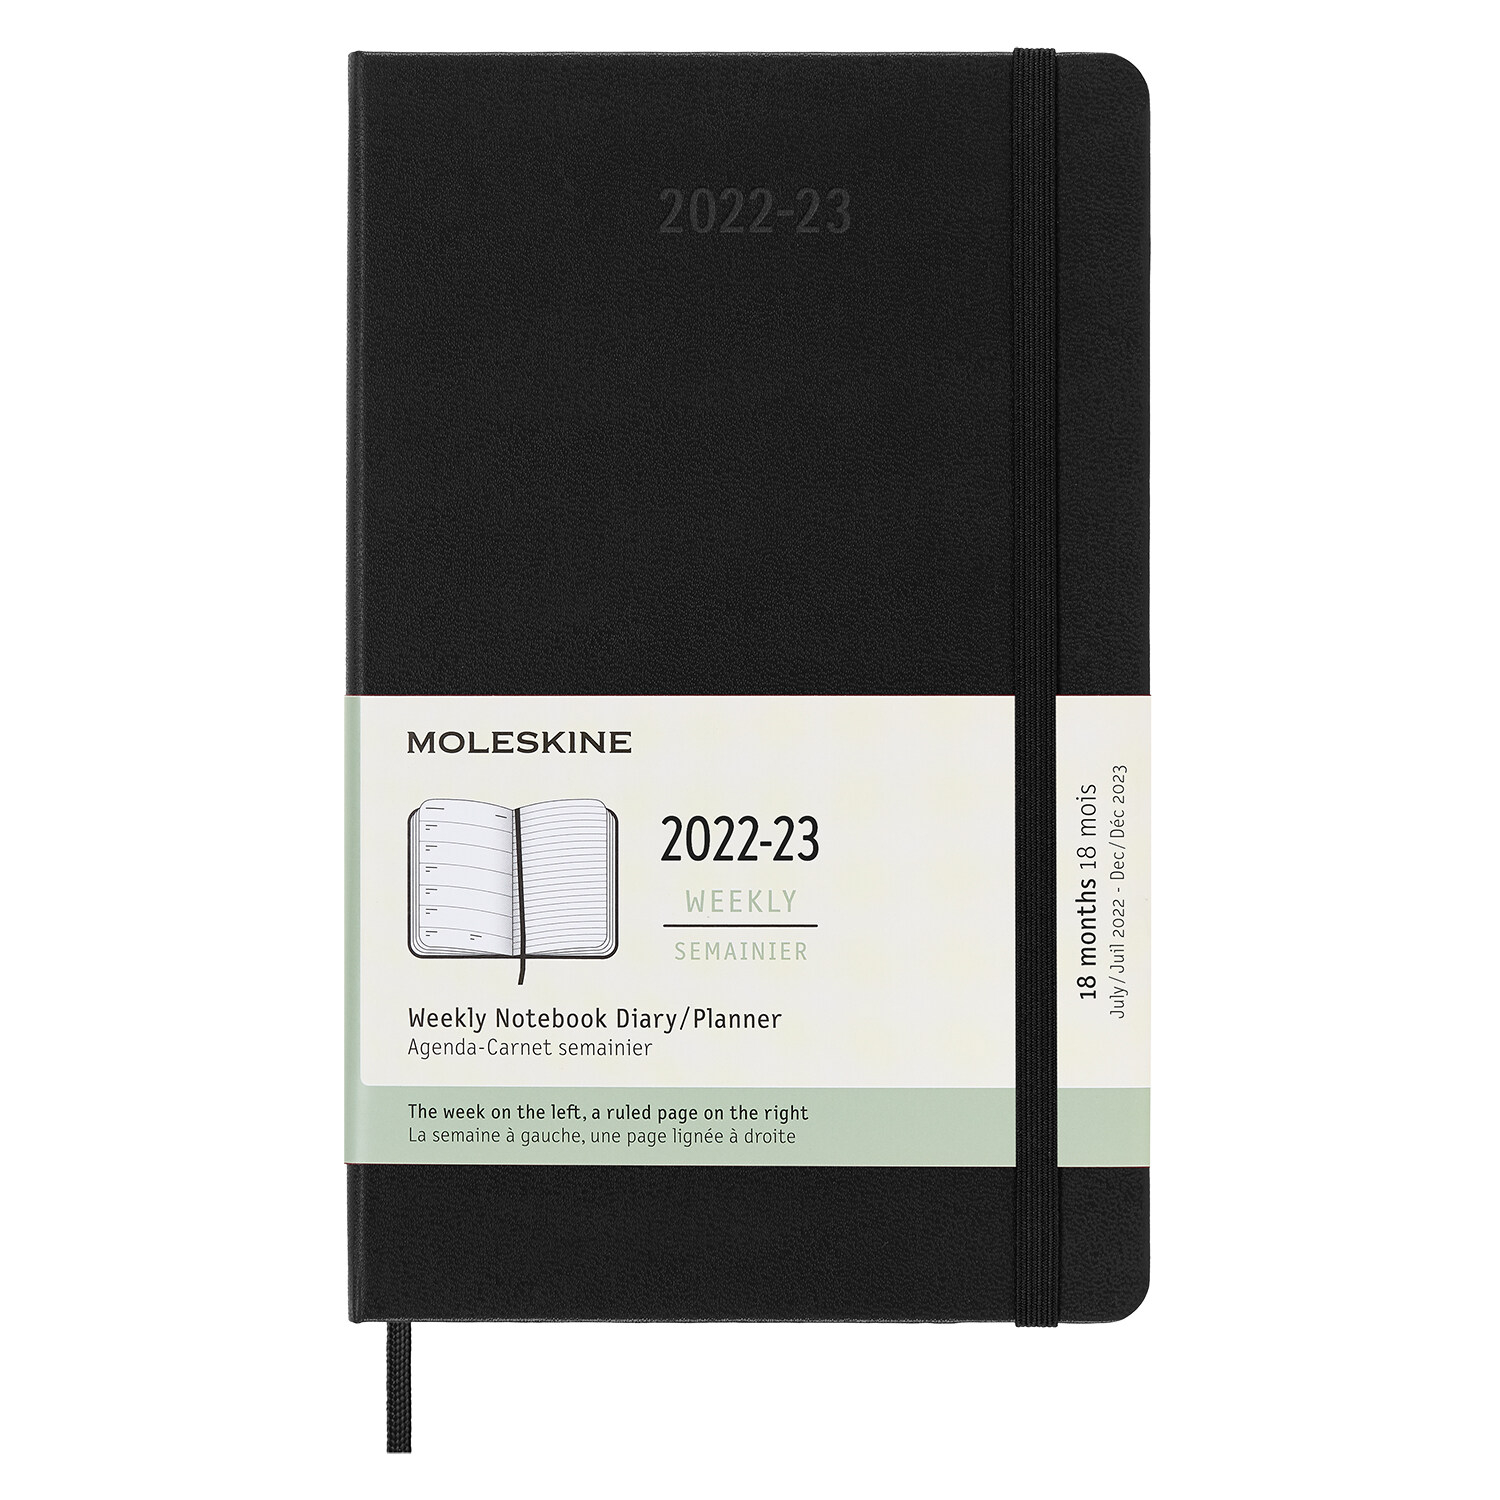 Moleskine 2023 Weekly Notebook Planner, 18m, Large, Black, Hard Cover (5 X 8.25) (Other)